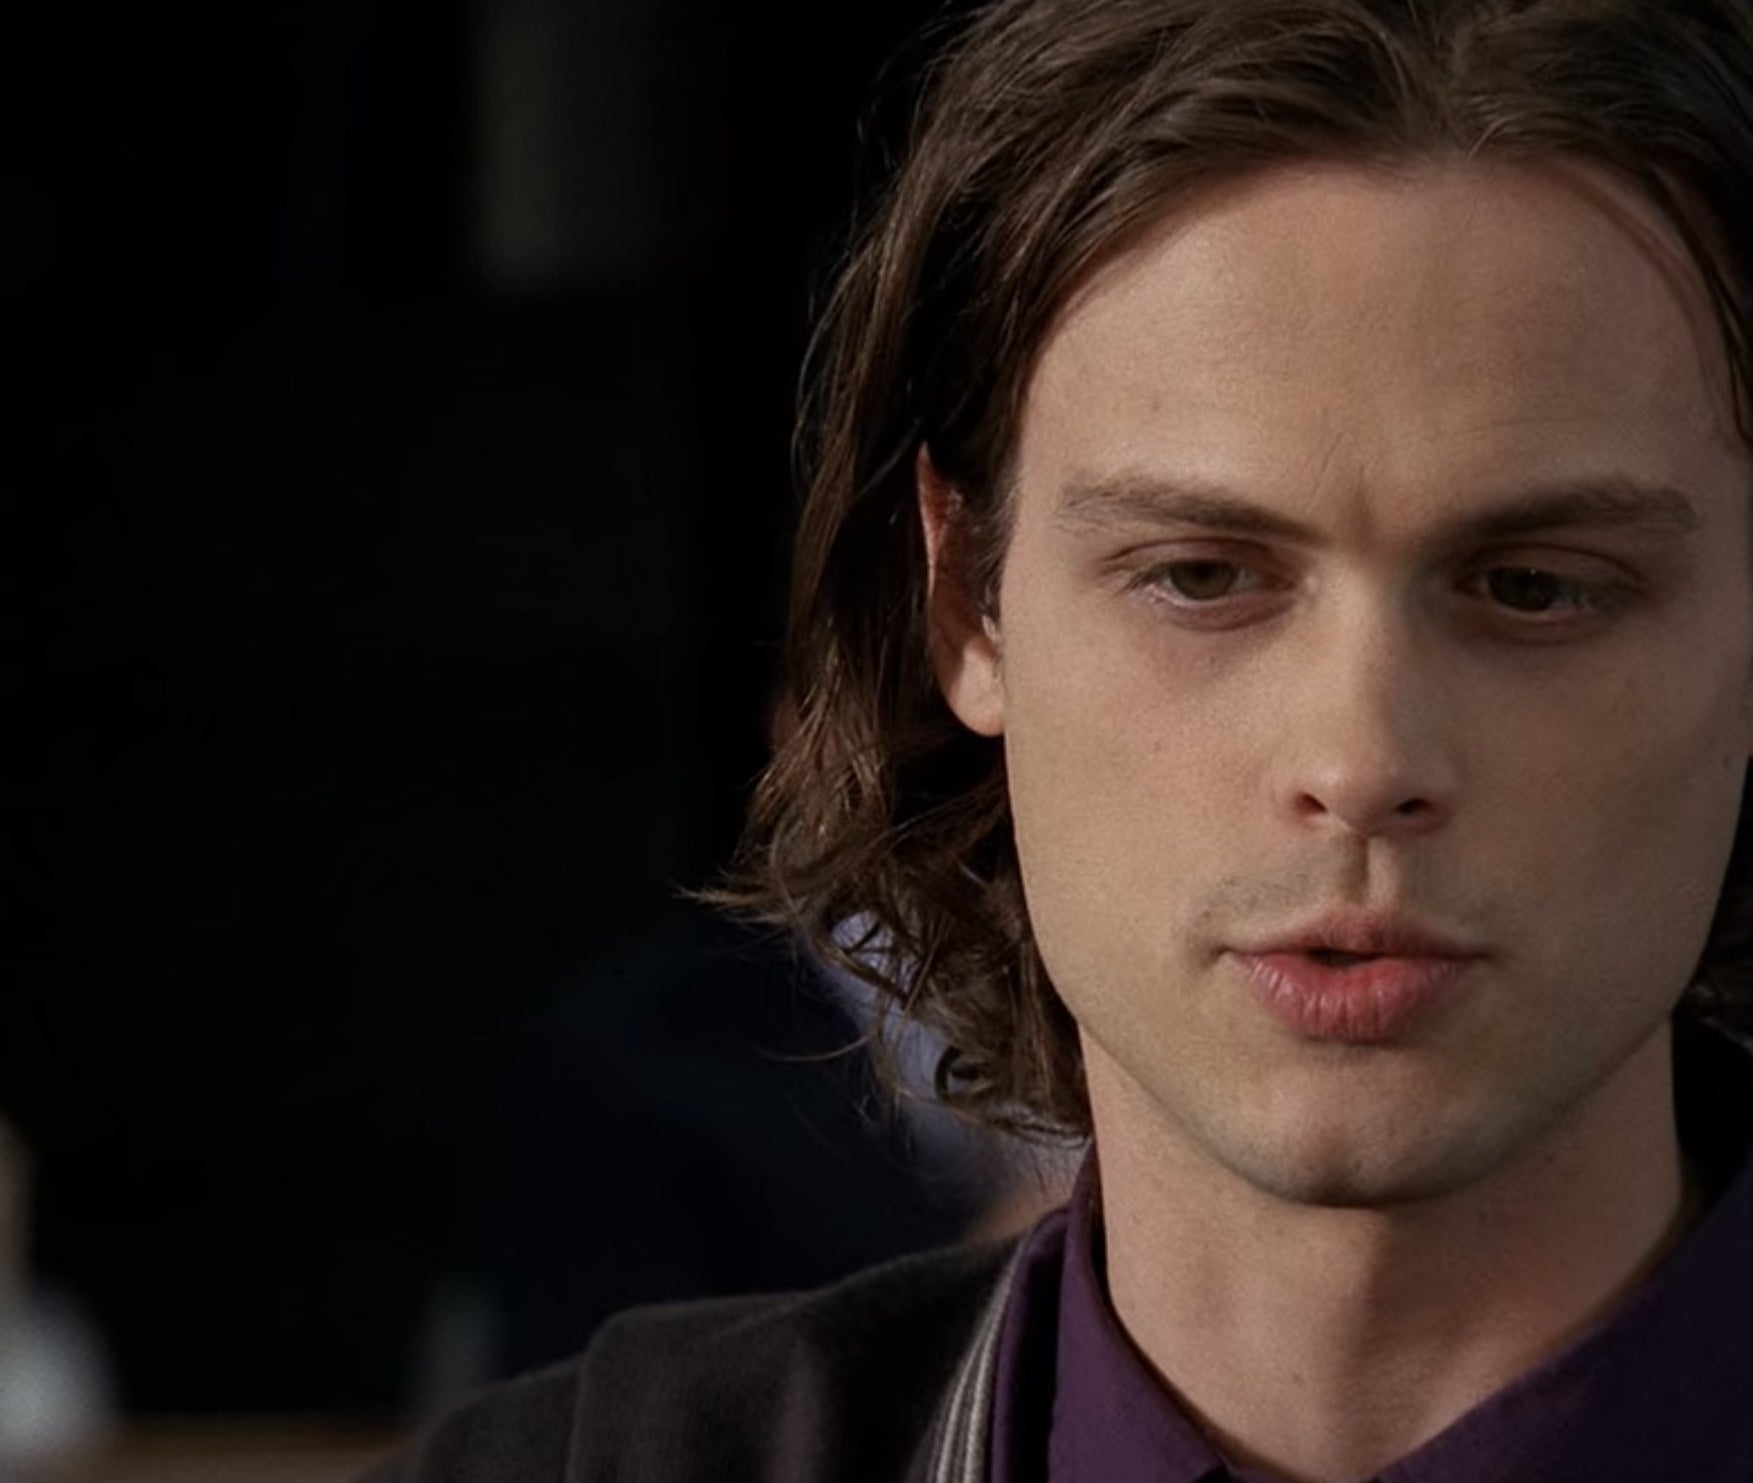 Spencer Reid From Criminal Minds Has Iconic Hair So I Rated His Looks From Worst To Best